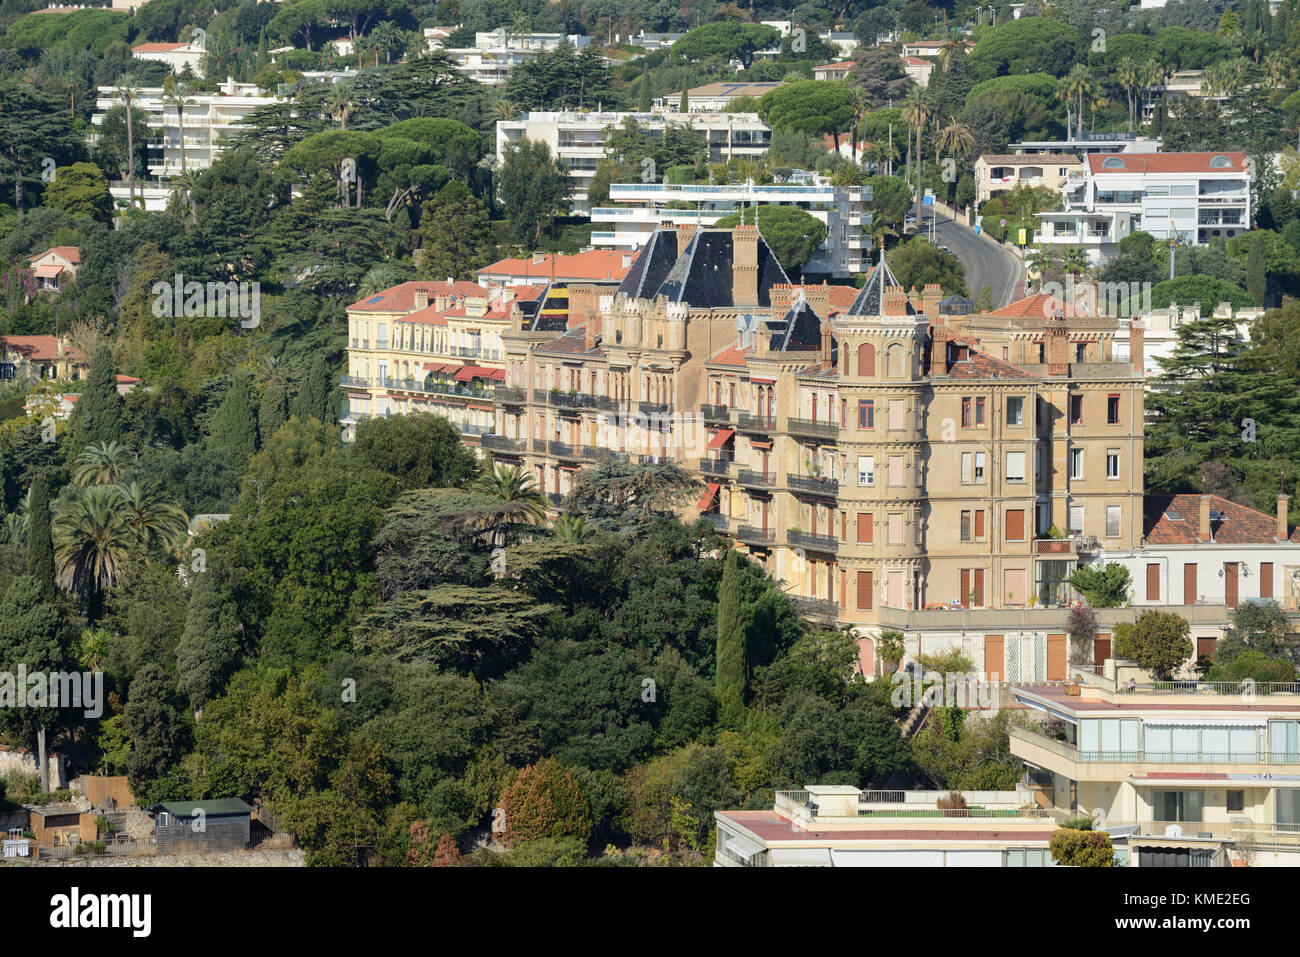 View over the Neo-Gothic Château Vallombrosa (1852-56), once the Hôtel du Park, now Luxury Apartments, Cannes, French Riviera, France Stock Photo